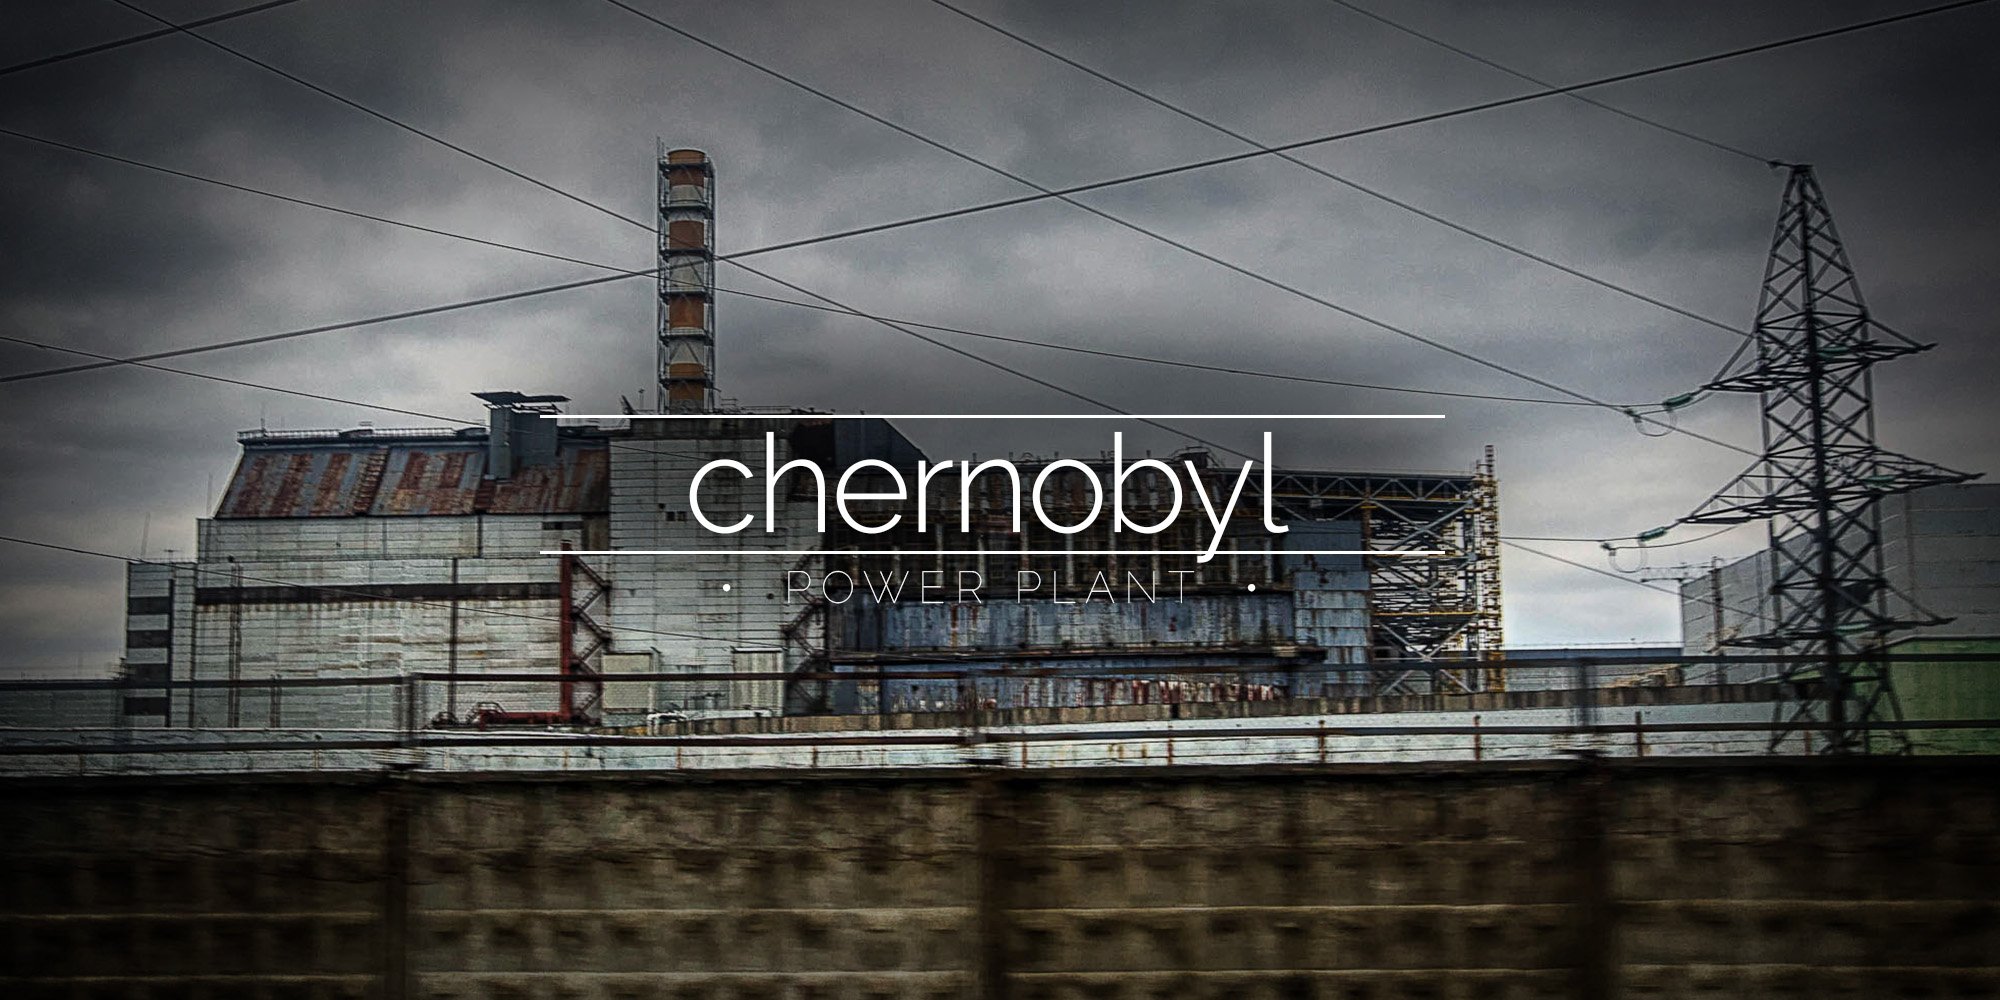 The Chernobyl Disaster Affected The UK, How?